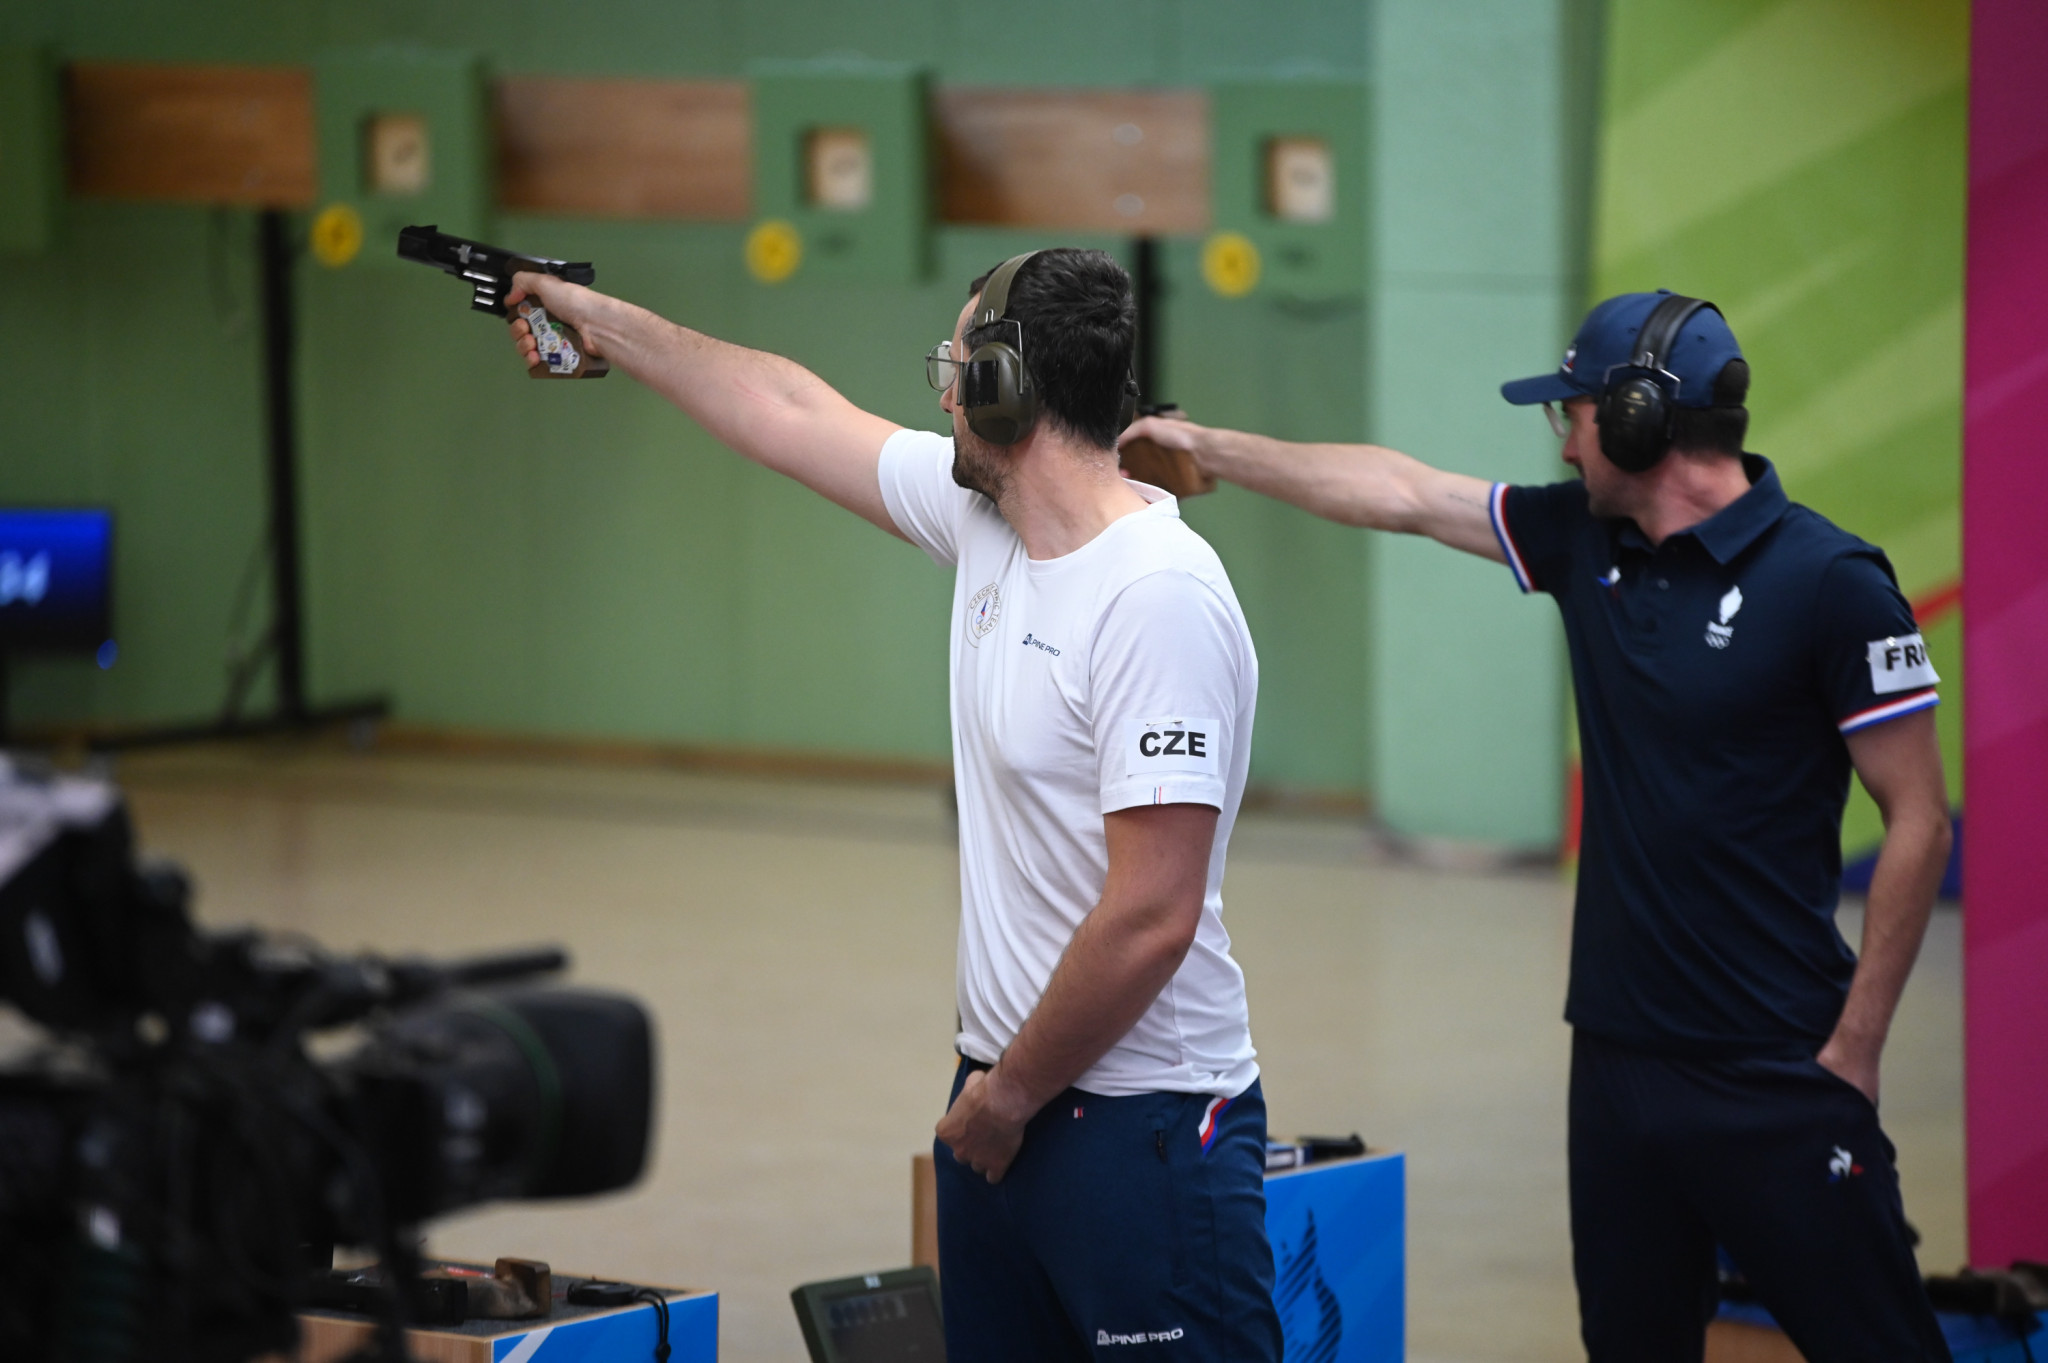 Martin Podhráský of the Czech Republic, left, won the men's 25m rapid fire pistol bronze and a Paris 2024 quota place because the top two had already secured theirs ©Kraków-Małopolska 2023